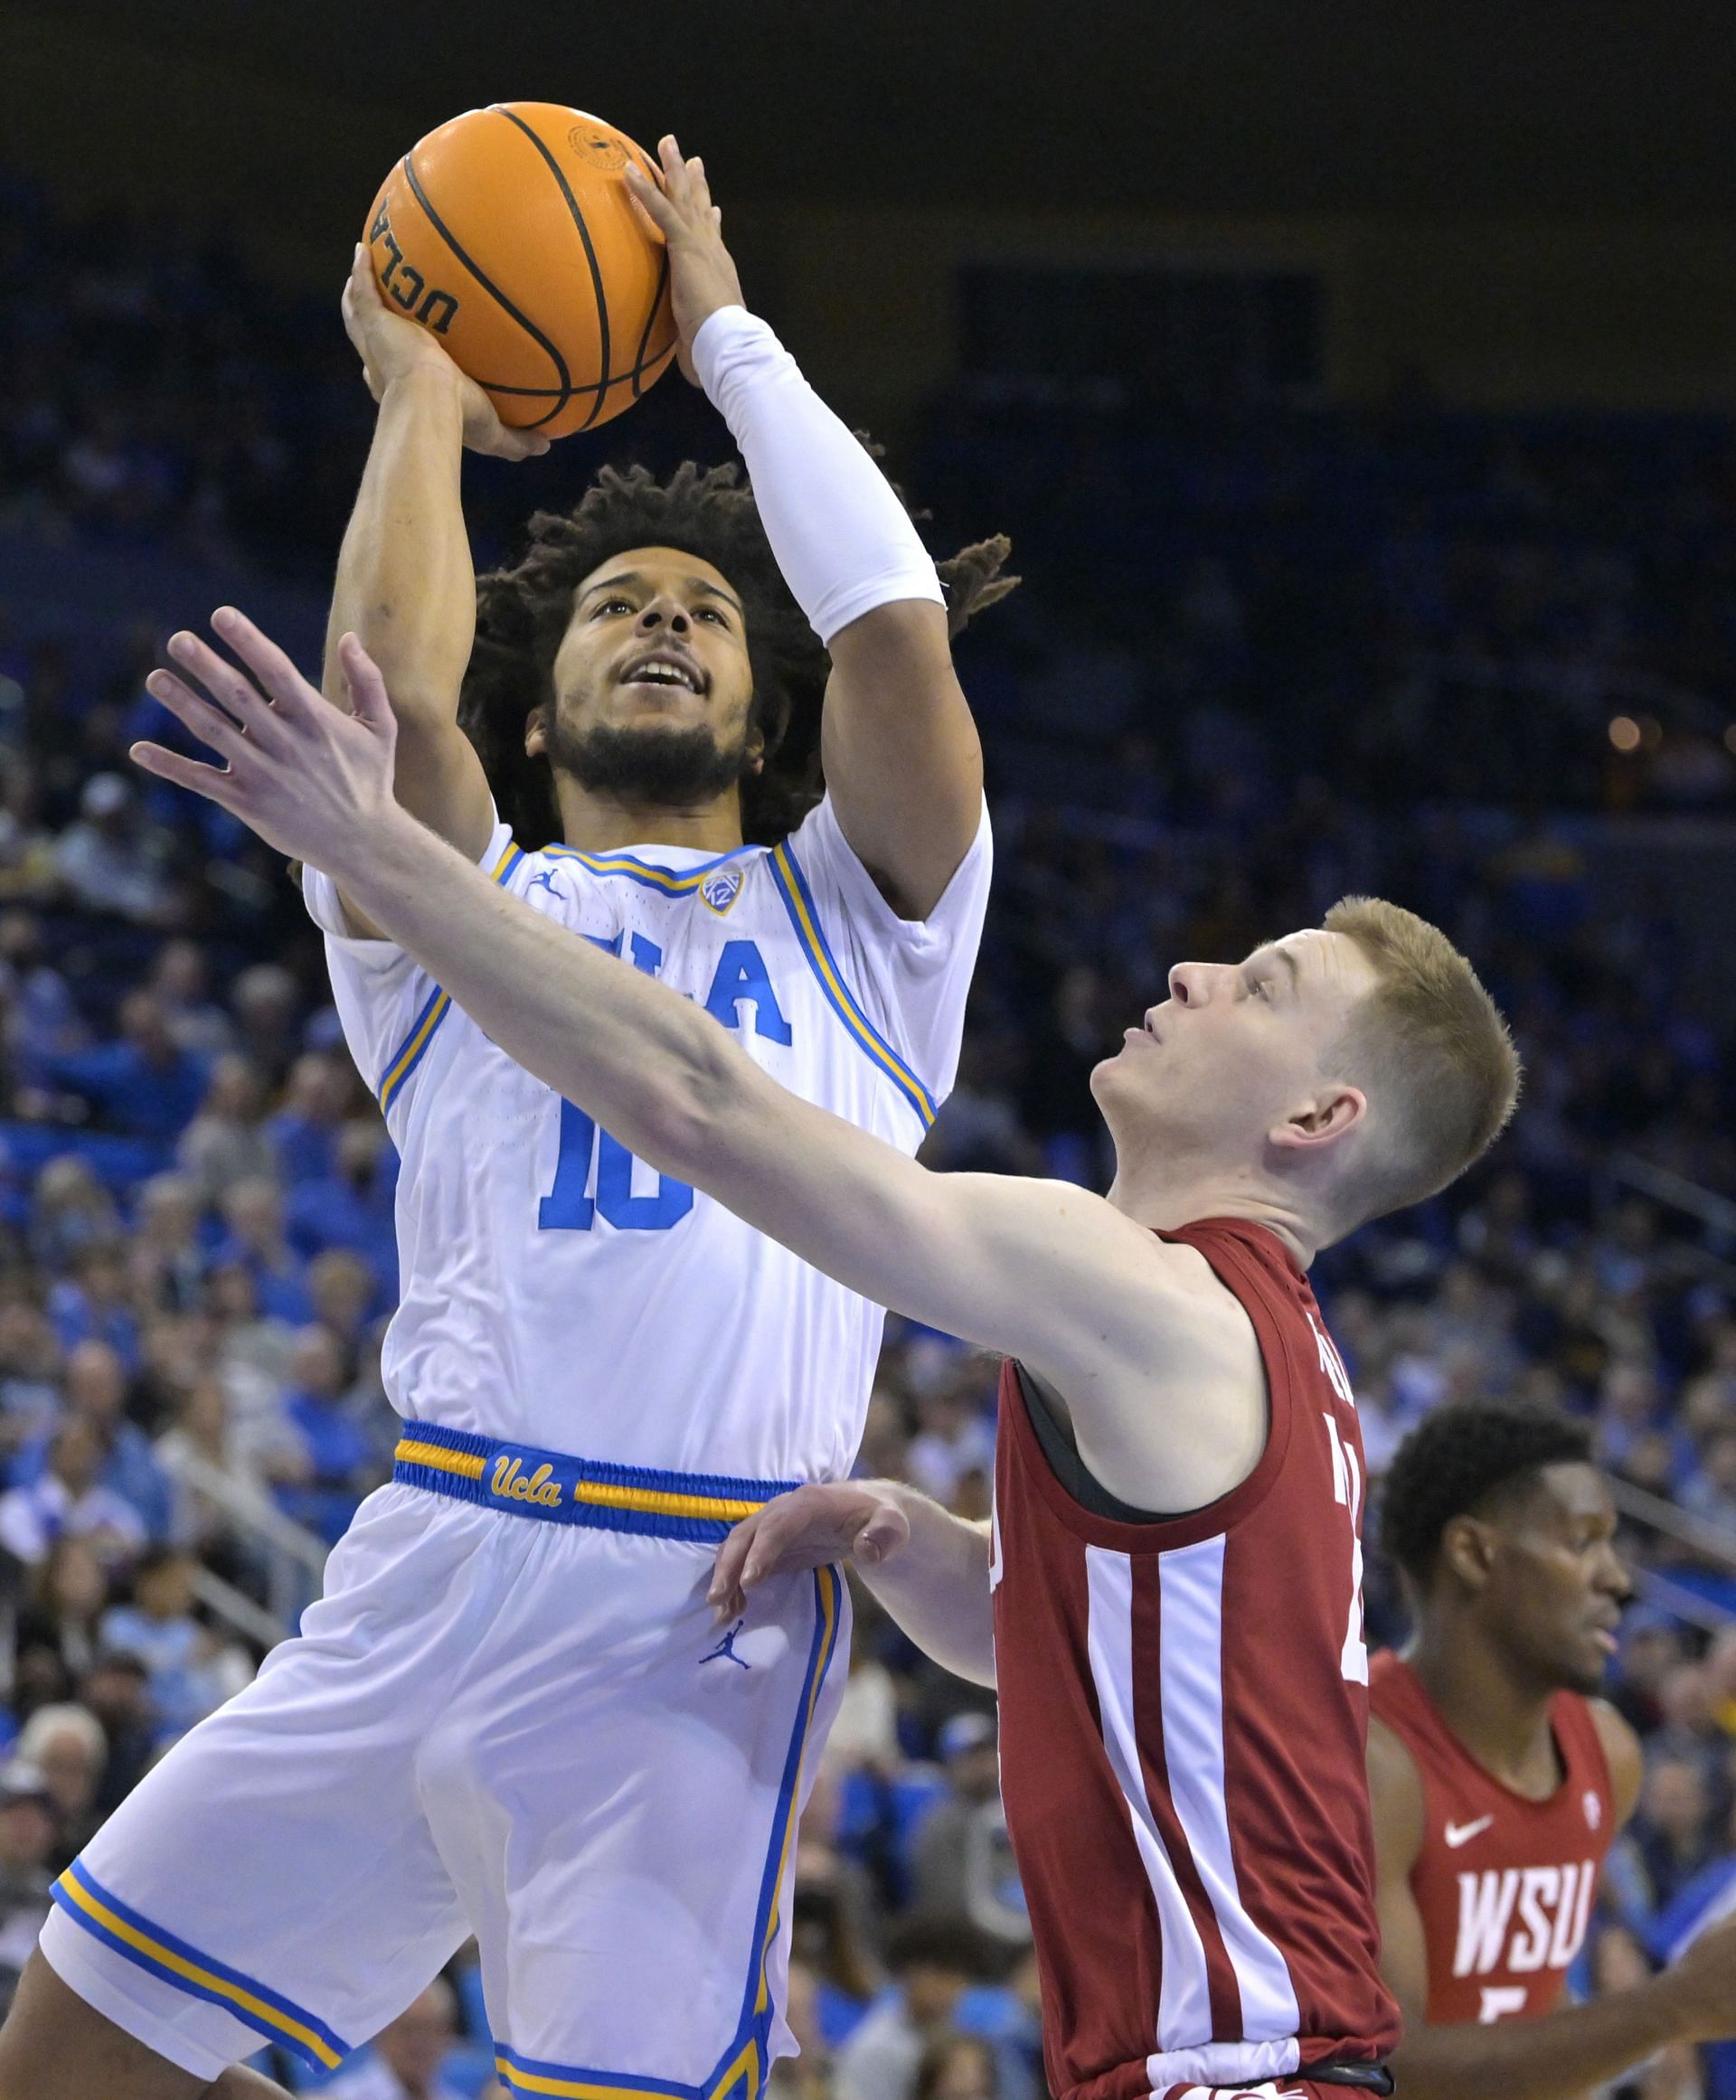 Myles Rice in action from the Washington State v UCLA matchup